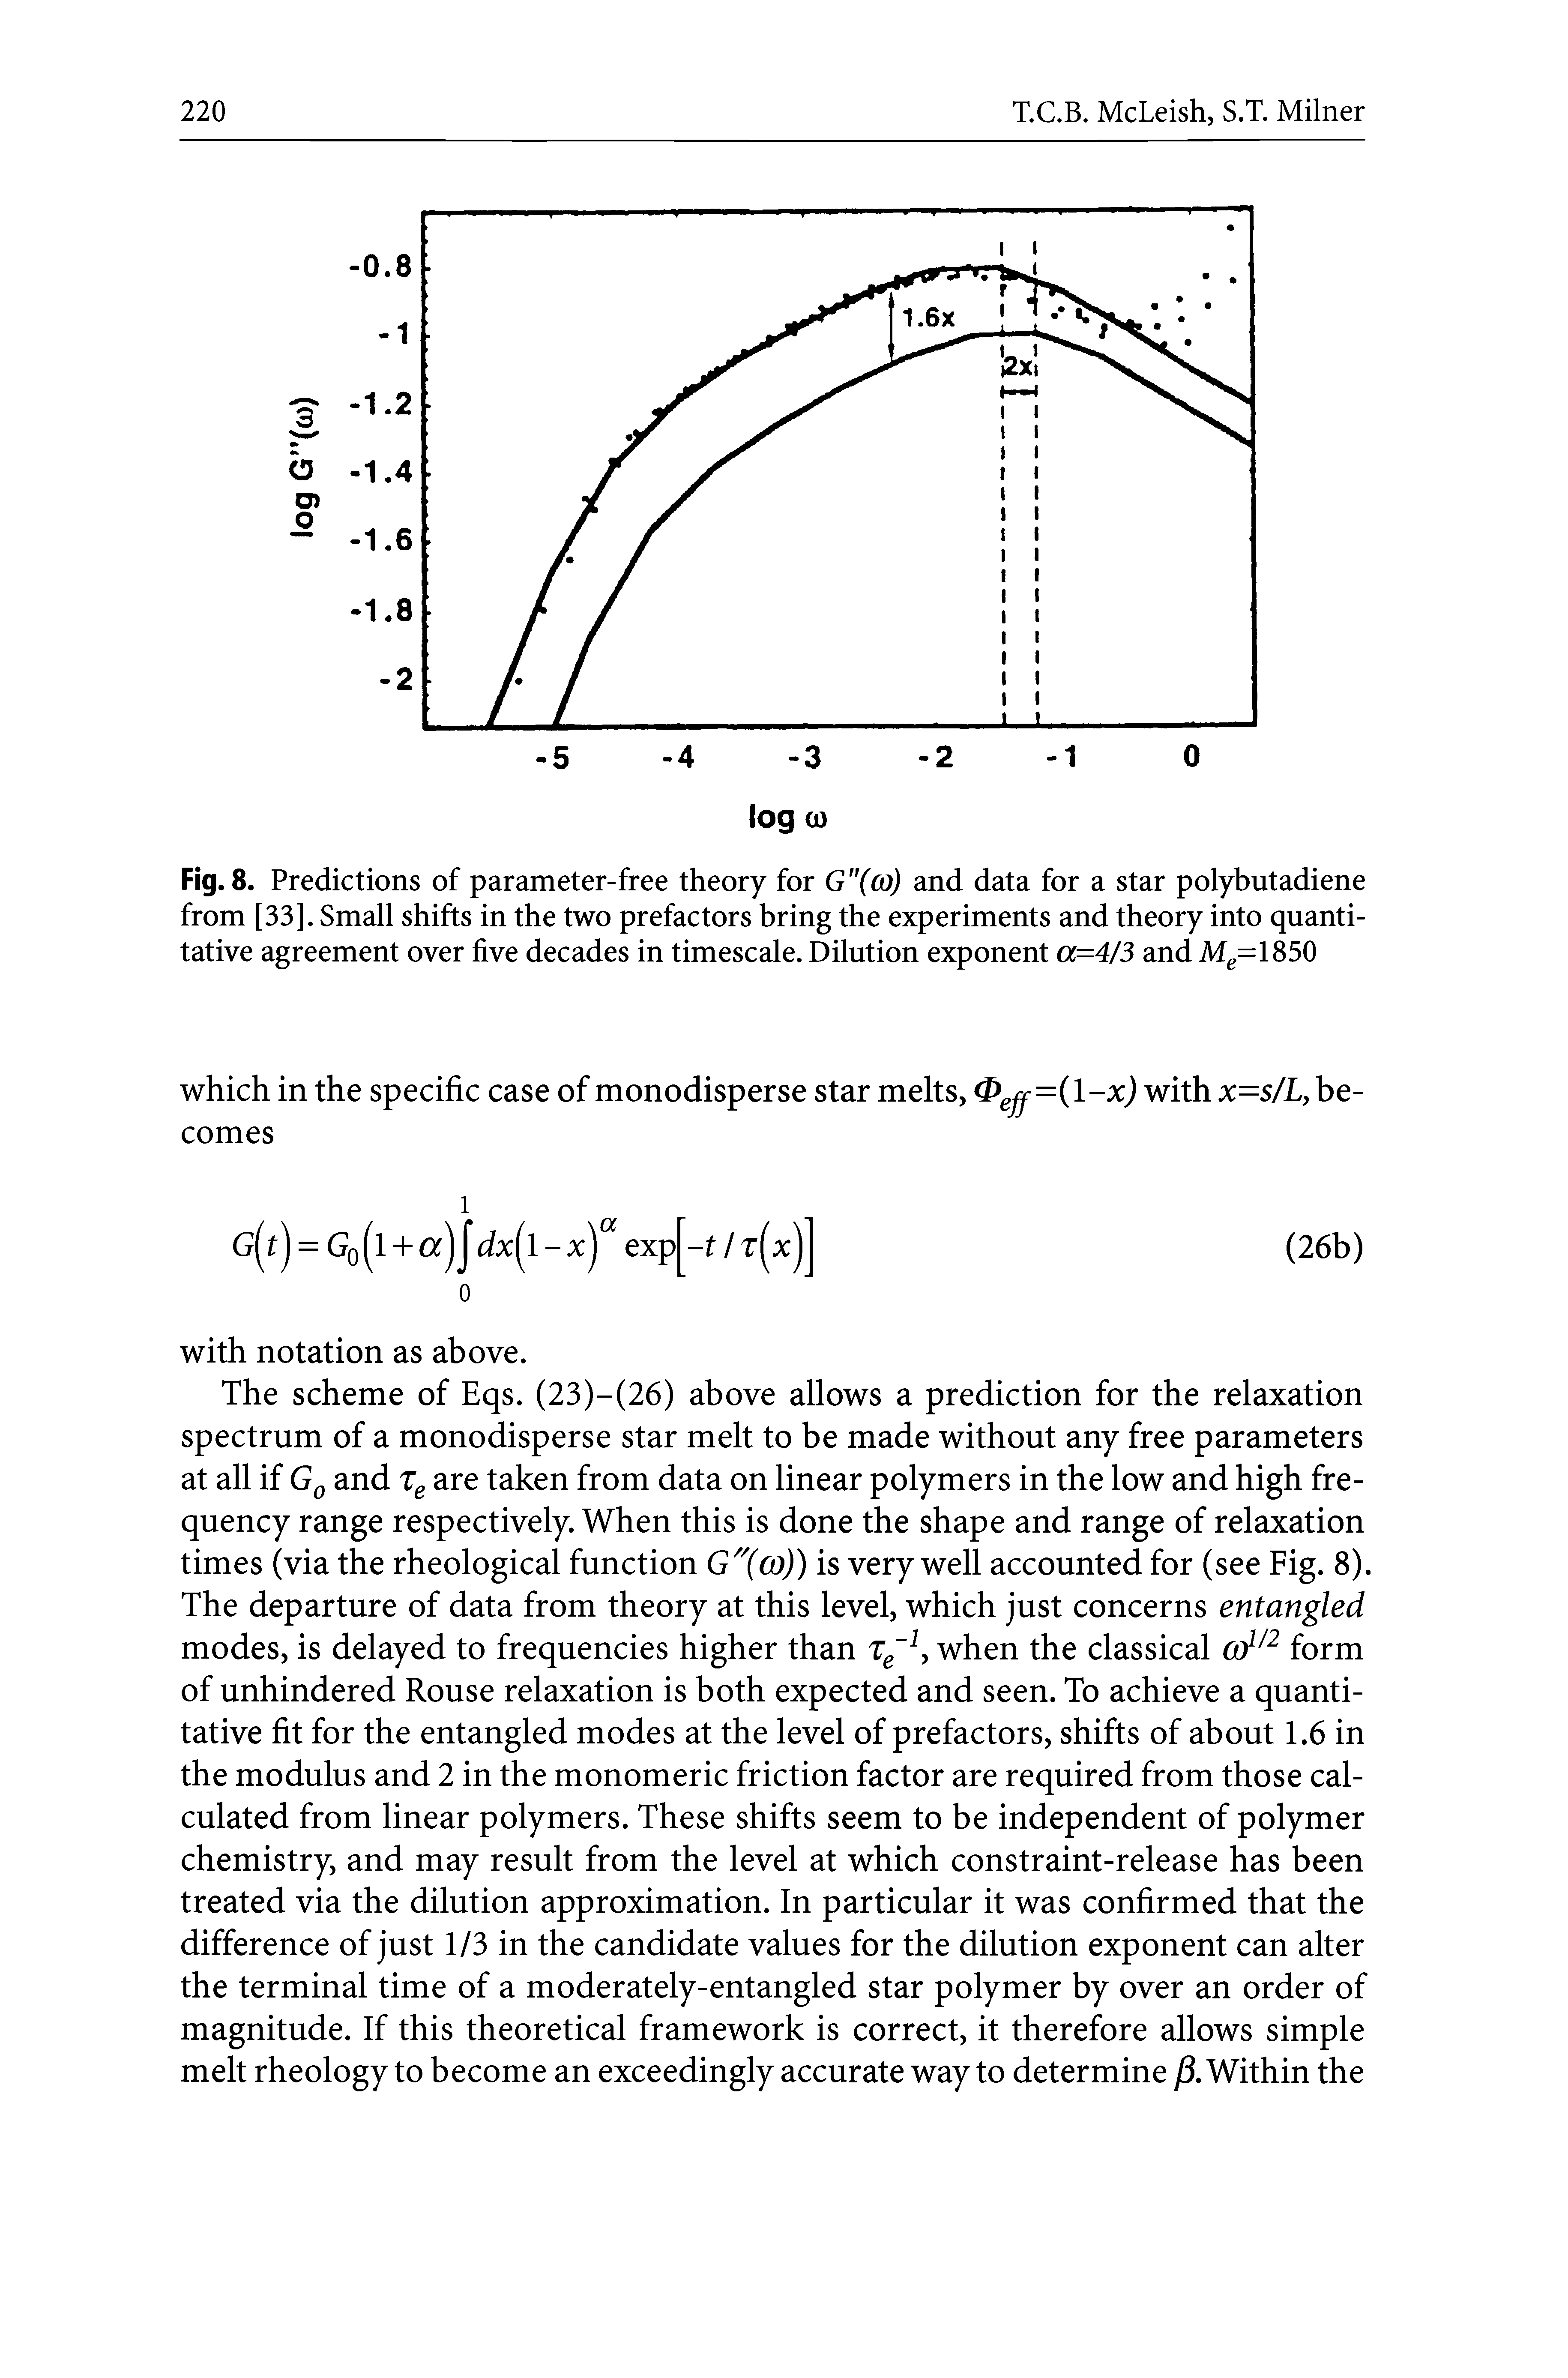 Fig. 8. Predictions of parameter-free theory for G"(co) and data for a star polybutadiene from [33]. Small shifts in the two prefactors bring the experiments and theory into quantitative agreement over five decades in timescale. Dilution exponent a=4/3 and Mg=1850...